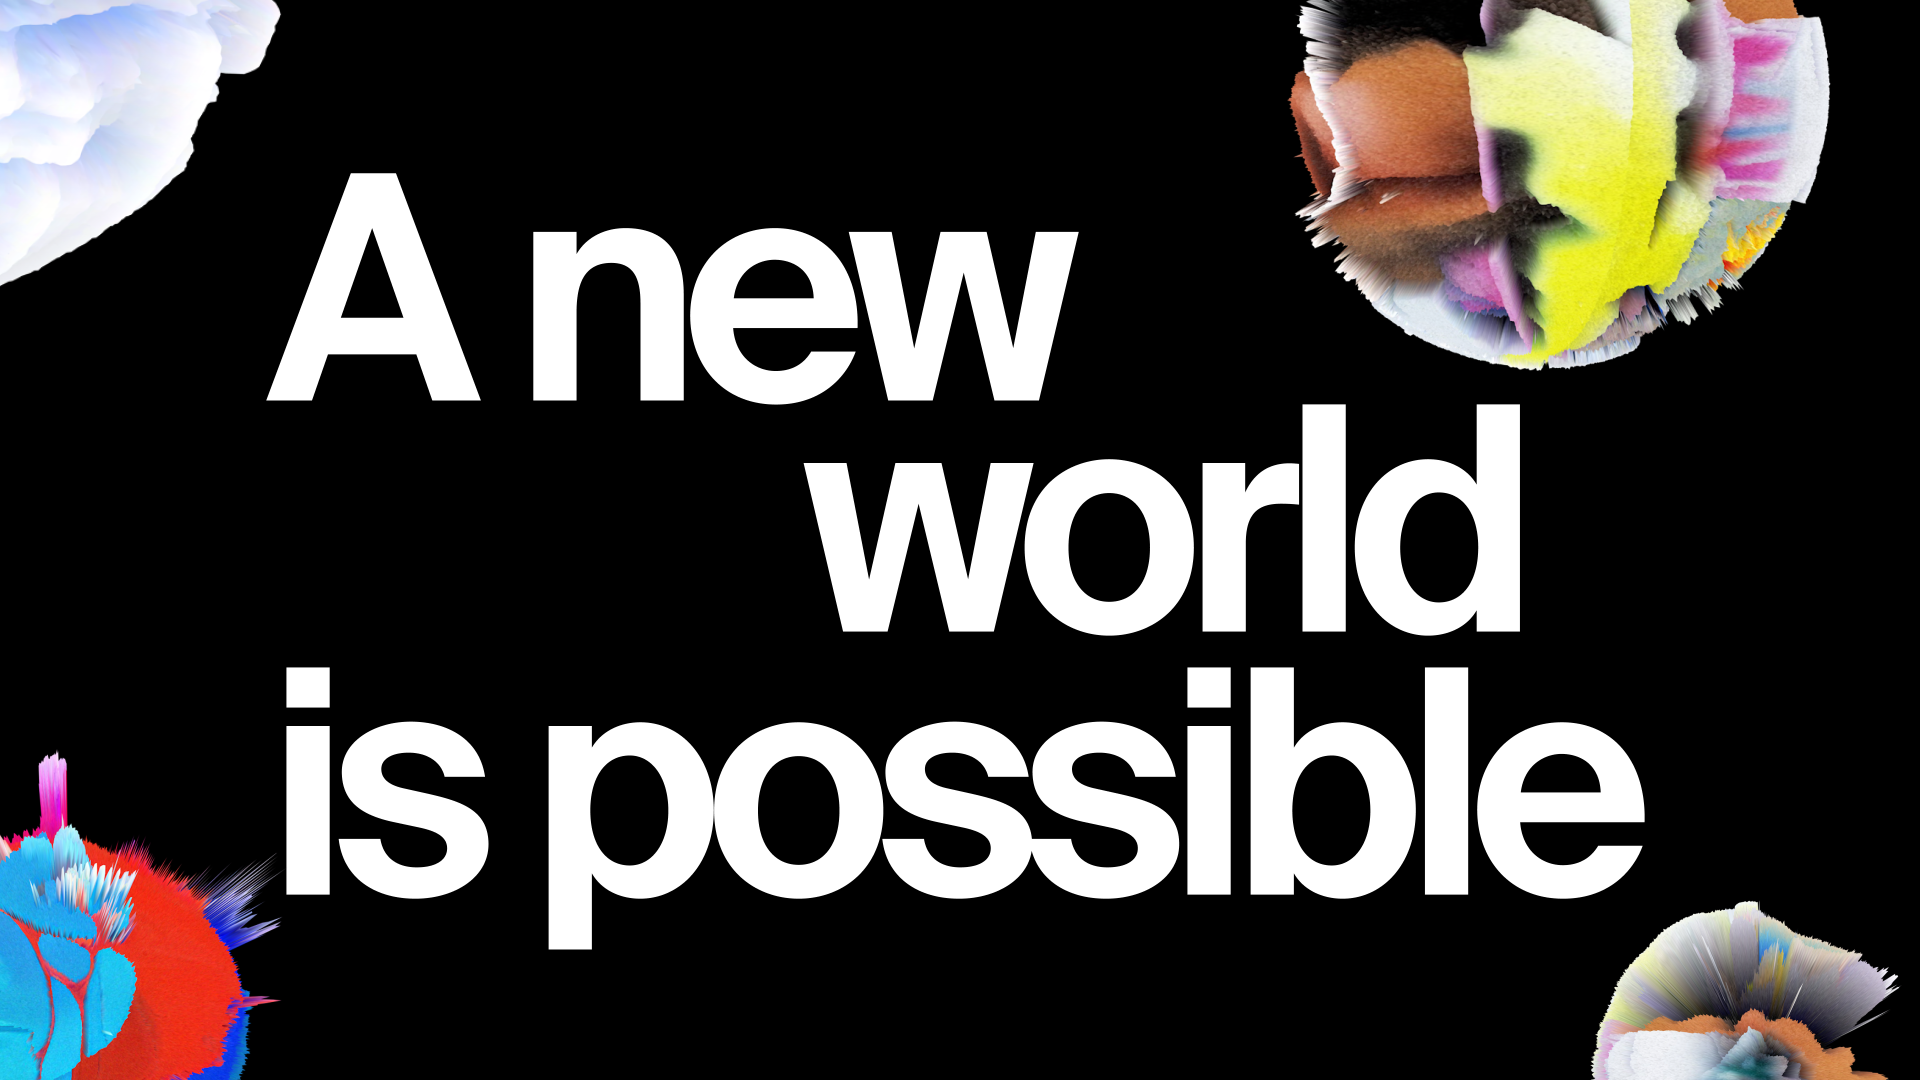 A new world is possible